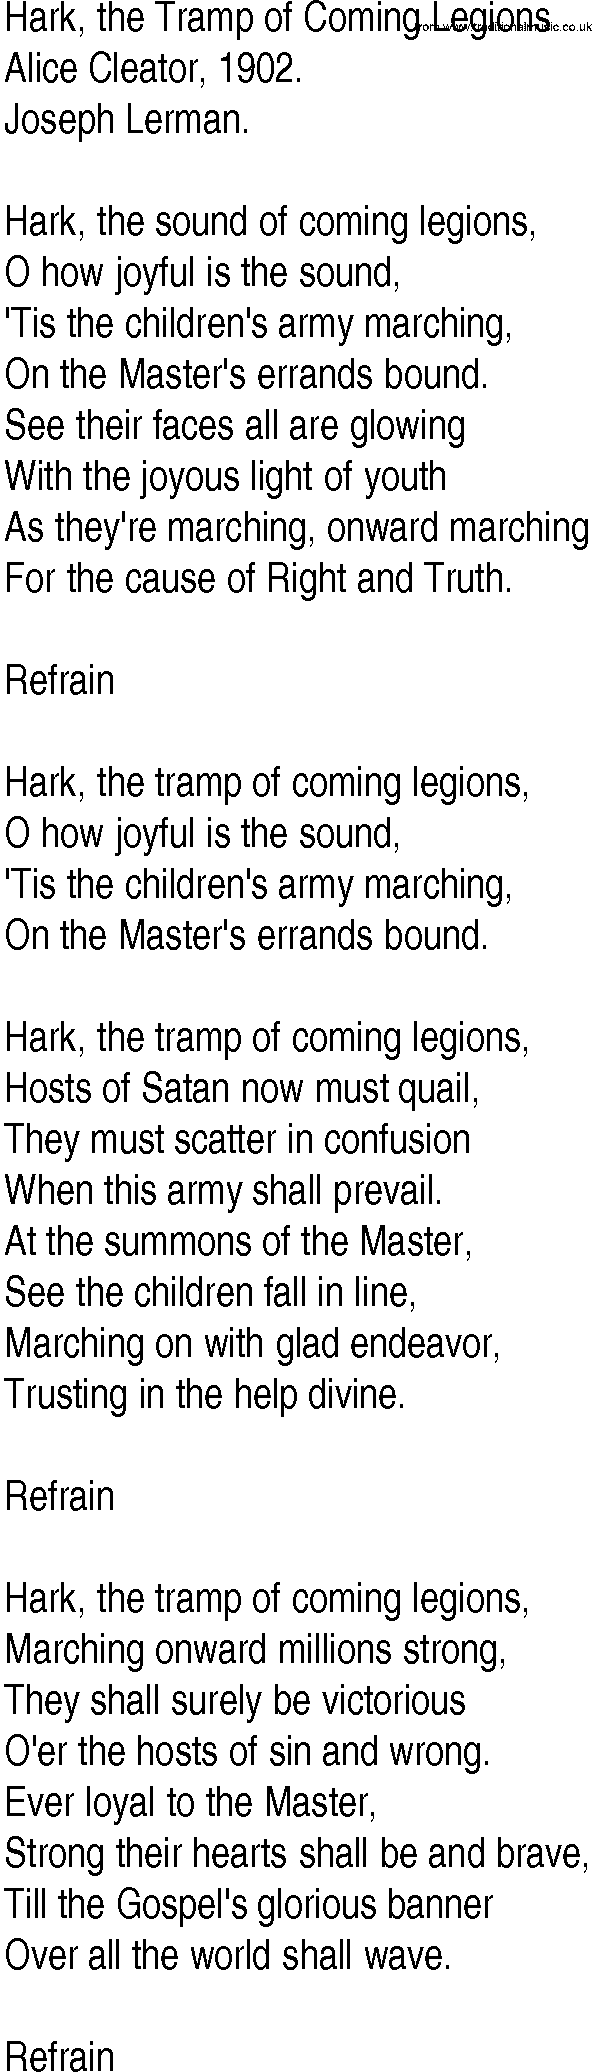 Hymn and Gospel Song: Hark, the Tramp of Coming Legions by Alice Cleator lyrics